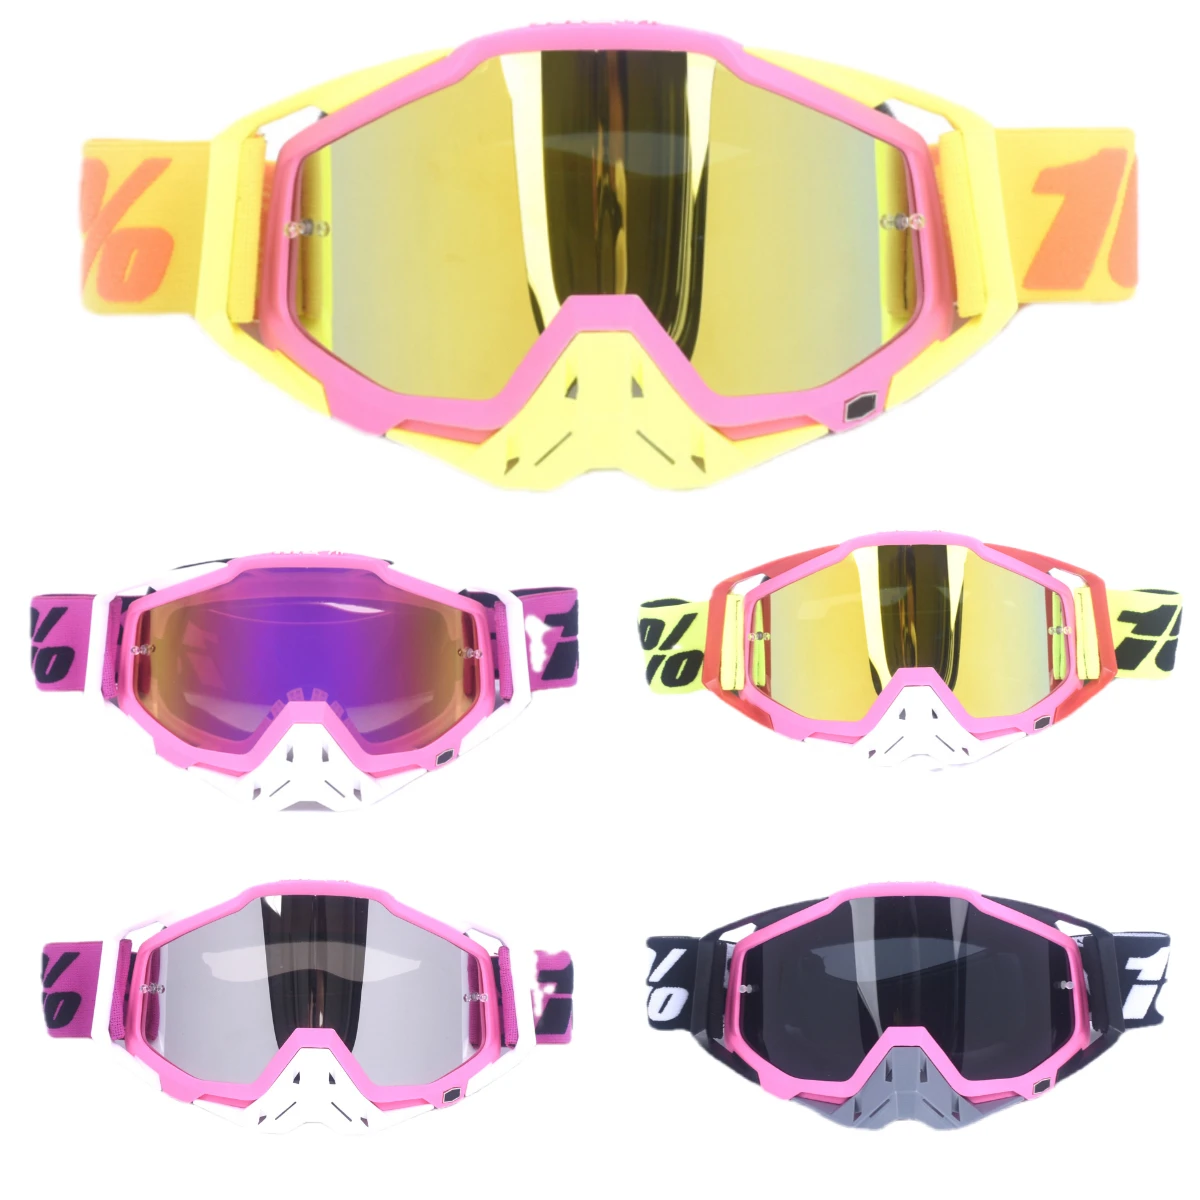 

Women's off-road vehicle goggles MX professional skiing goggles, colored anti fog, high-quality sponge design, outdoor cycling c